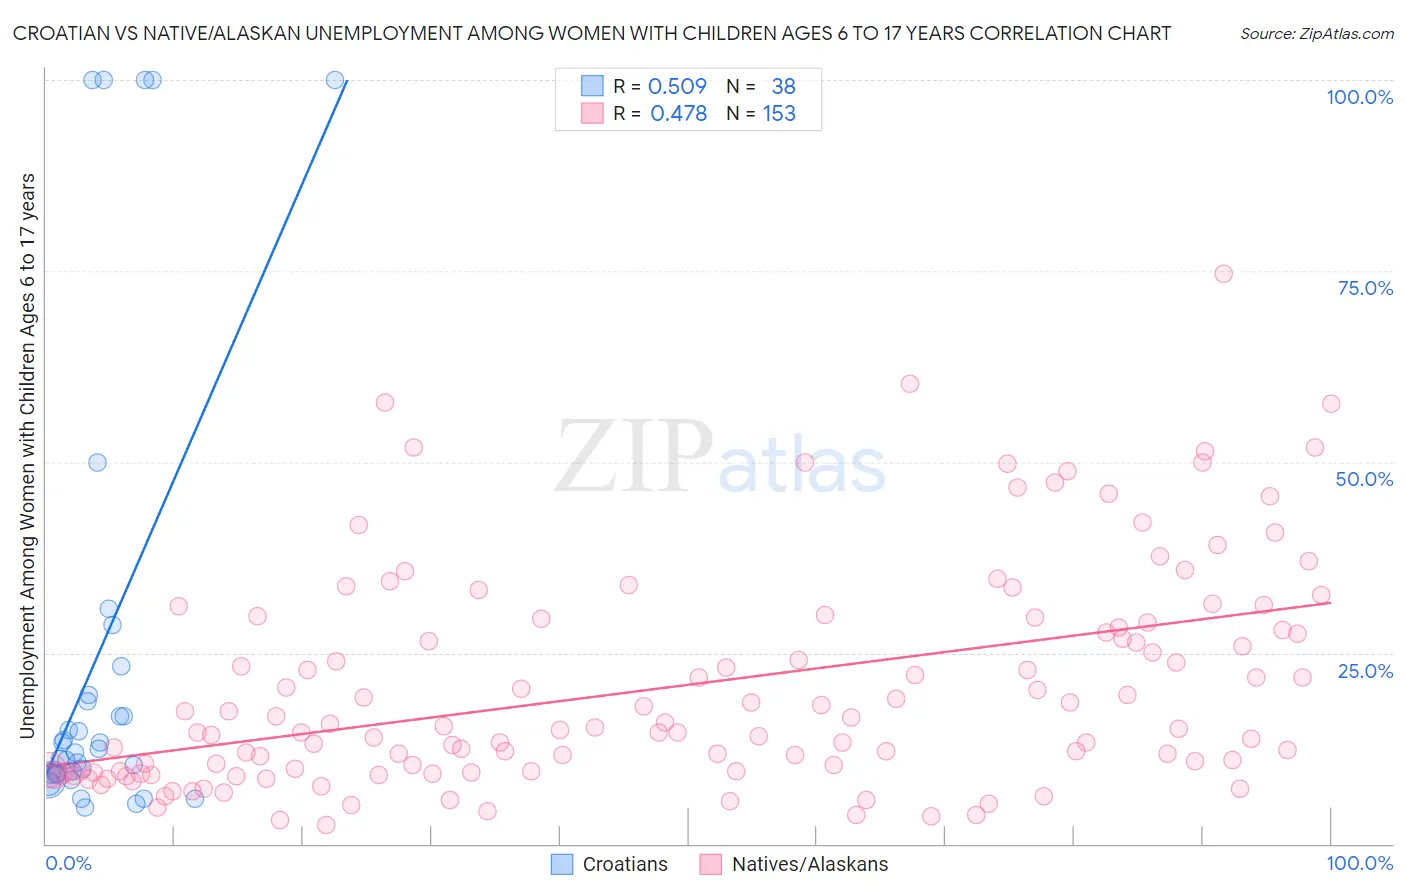 Croatian vs Native/Alaskan Unemployment Among Women with Children Ages 6 to 17 years